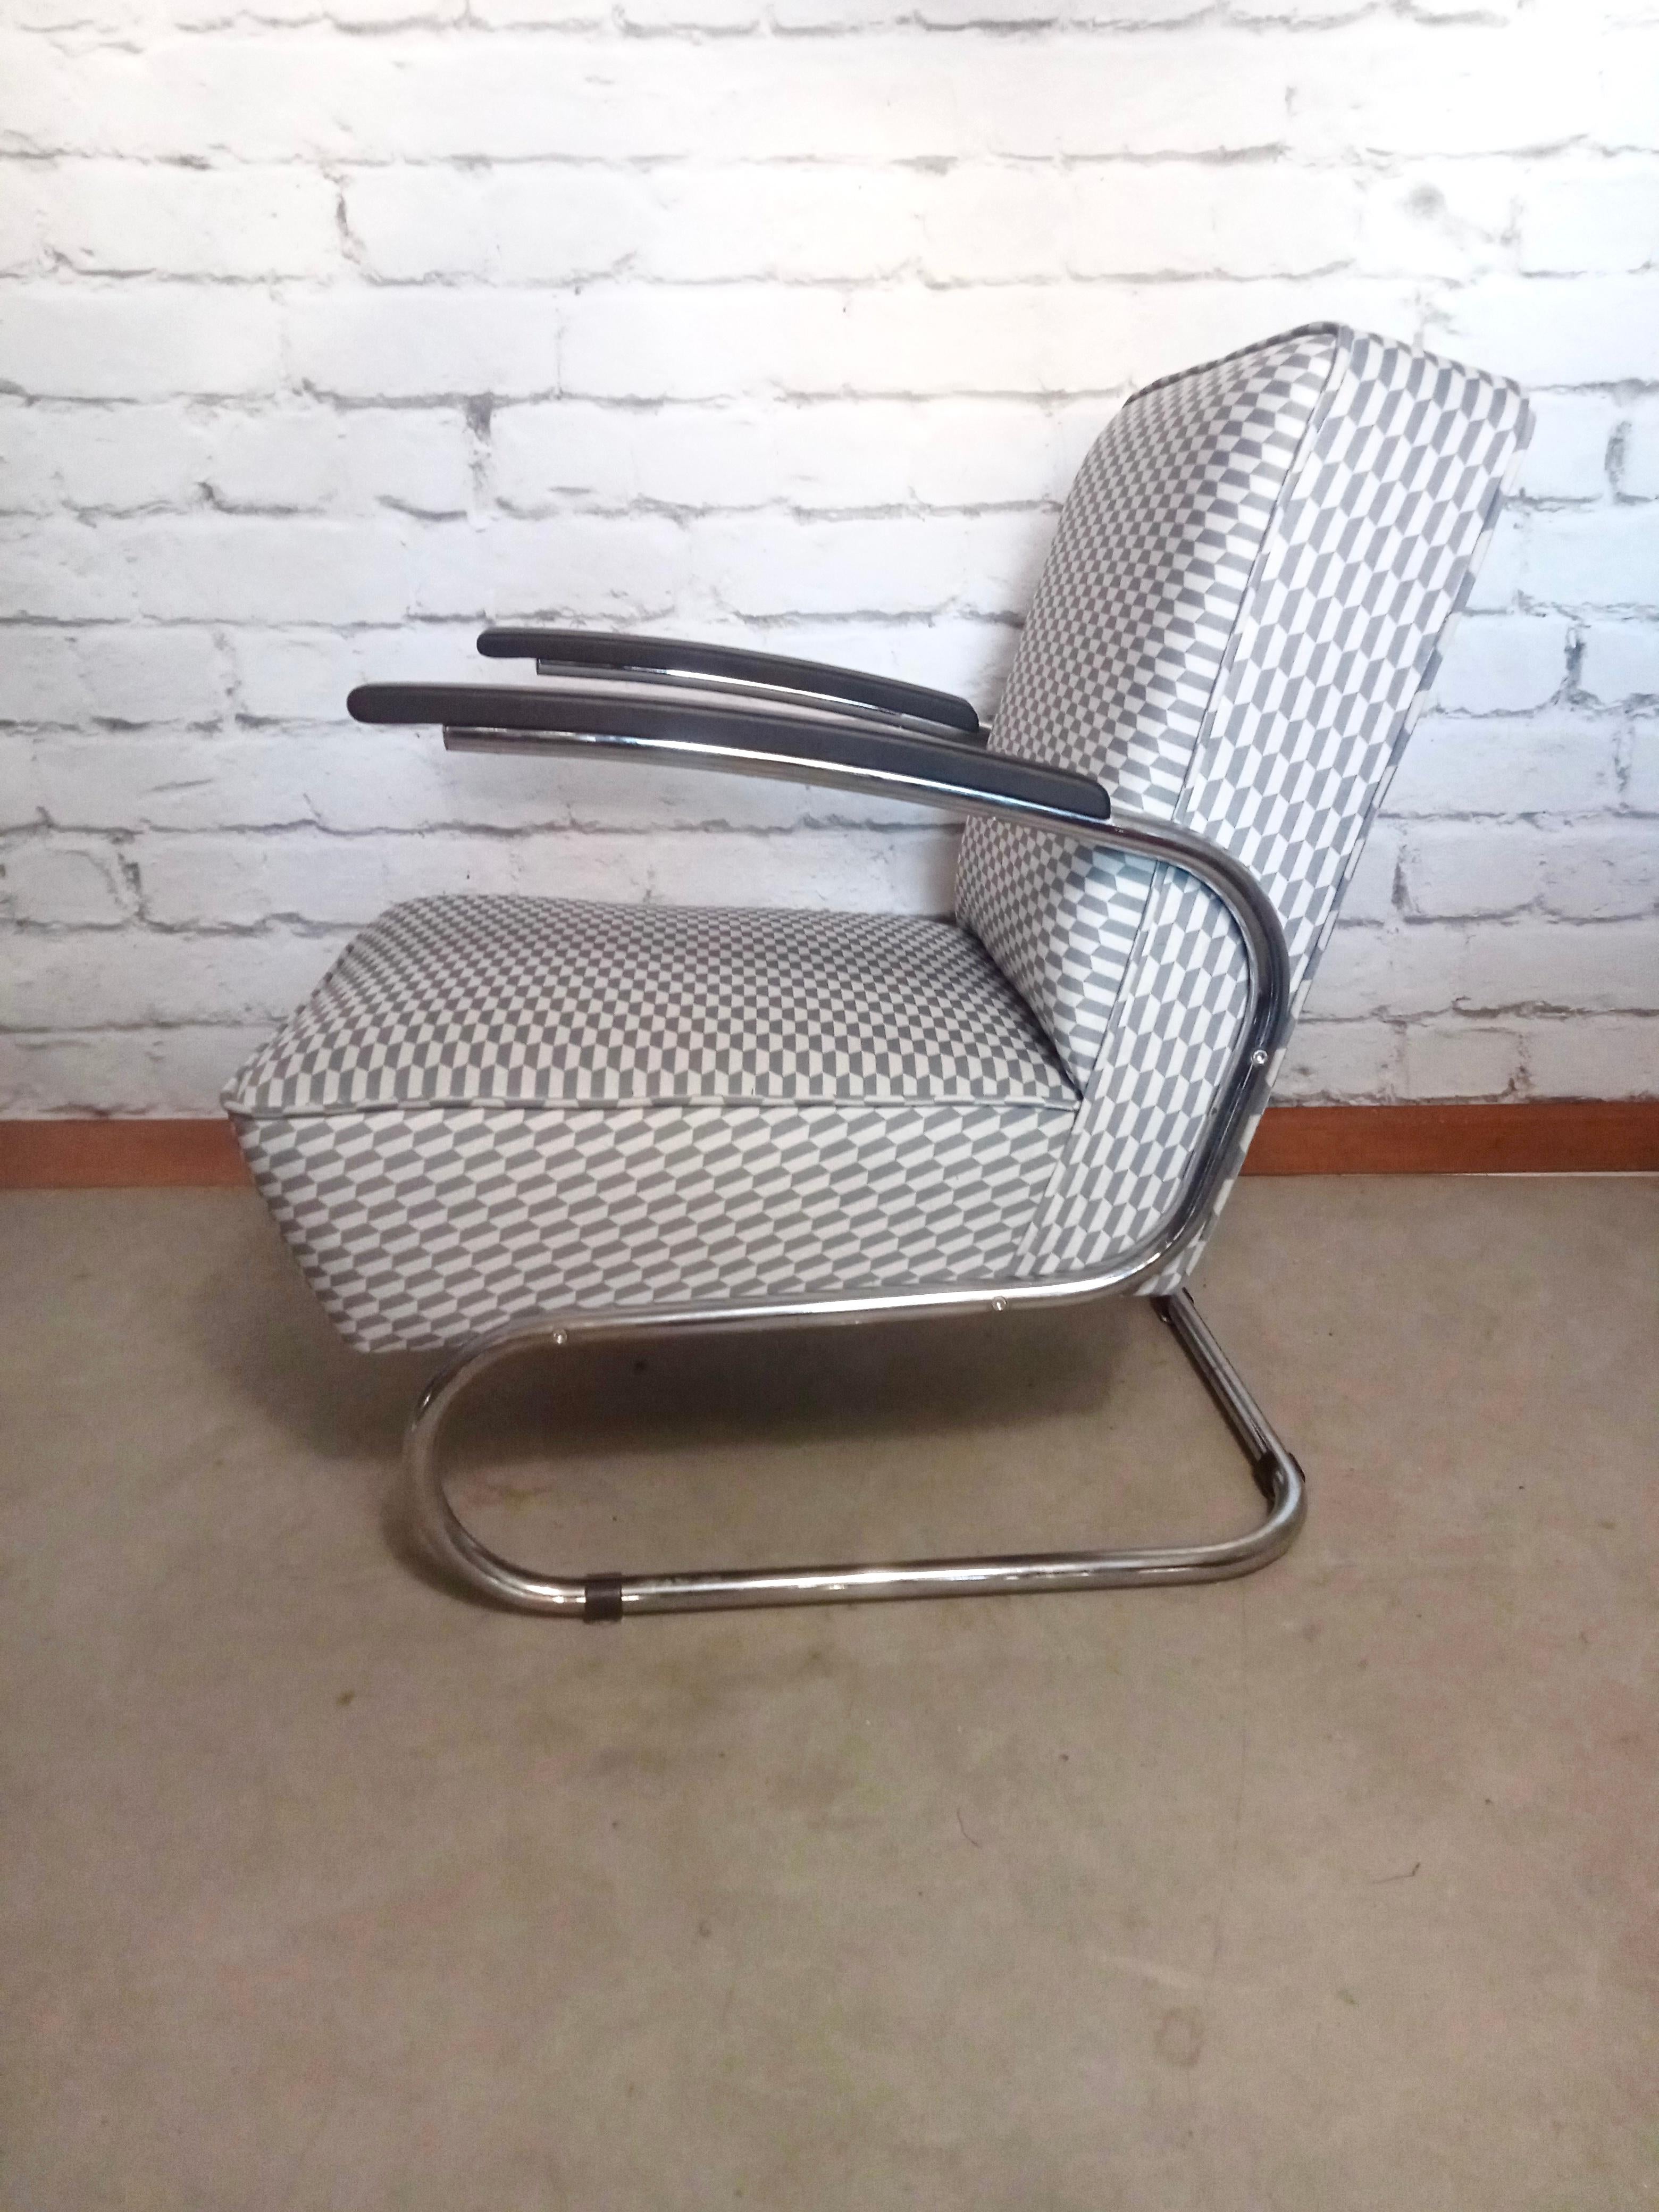 The outstanding properties of this armchair are elegance, timelessness and exceptional seating comfort. Added is a lightness that only a cantilever model can have. Designed in 1932 by the Thonet design team. Undoubtedly one of the icons of modernist